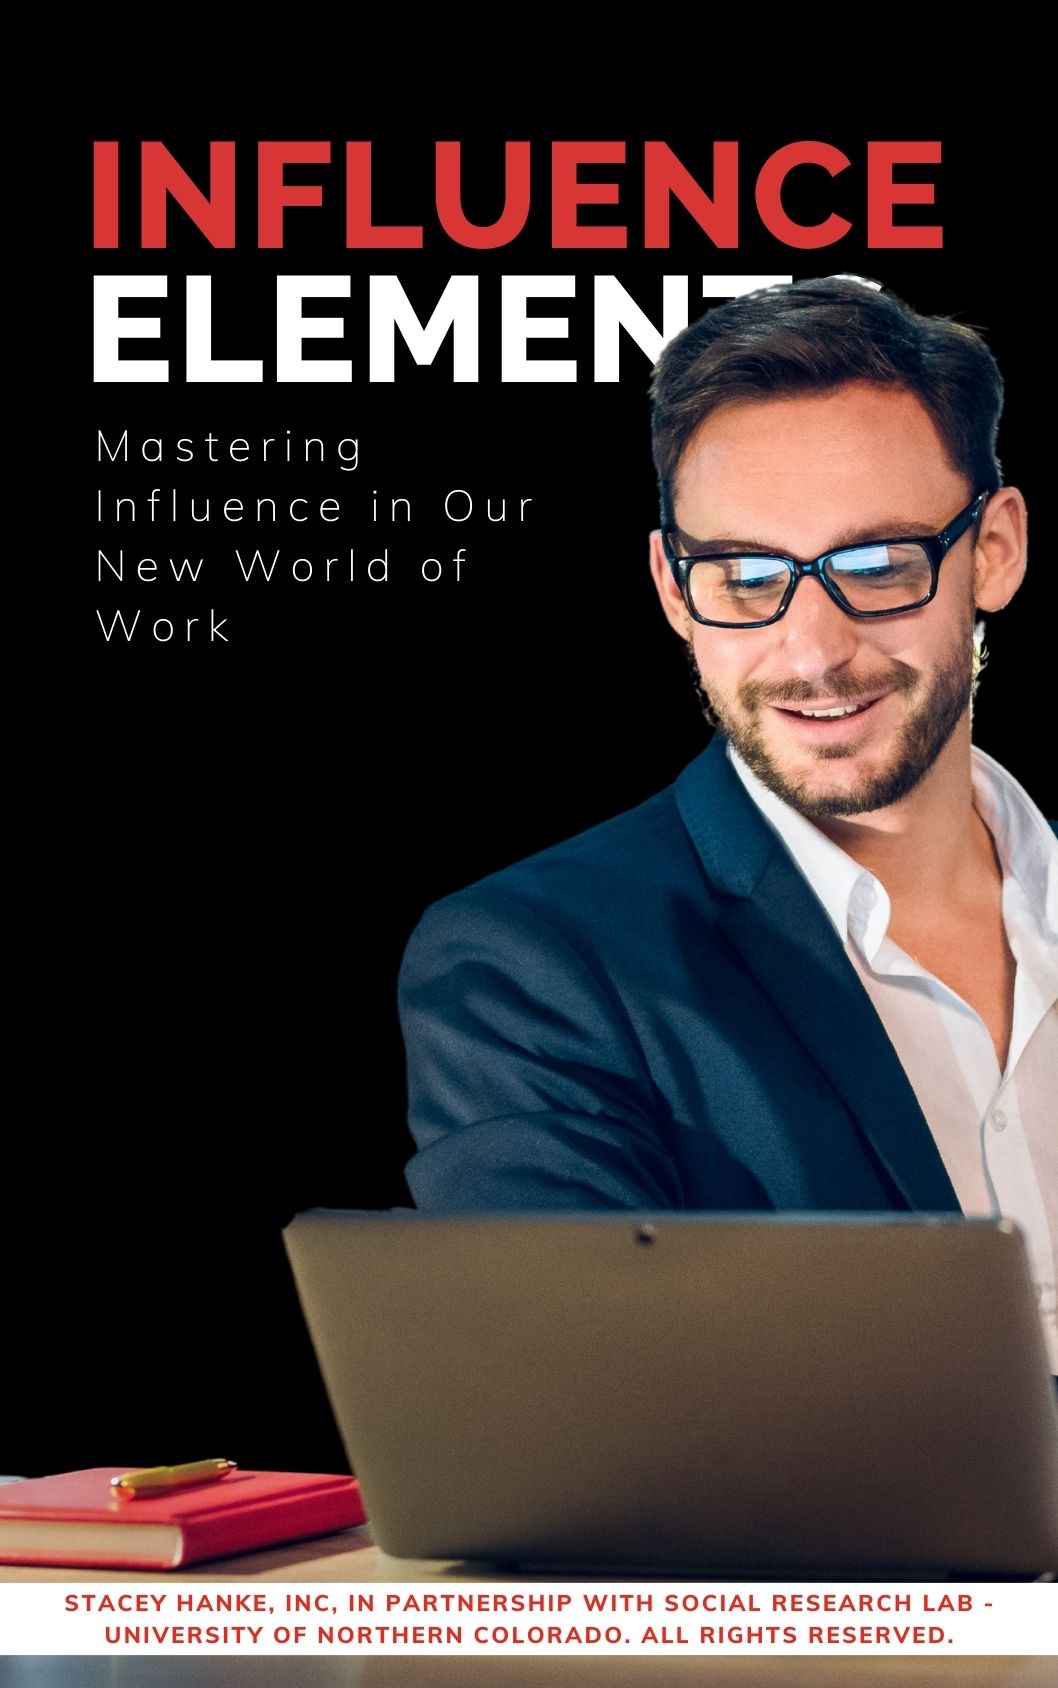 INFLUENCE ELEMENTS RESEARCH STACEY HANKE